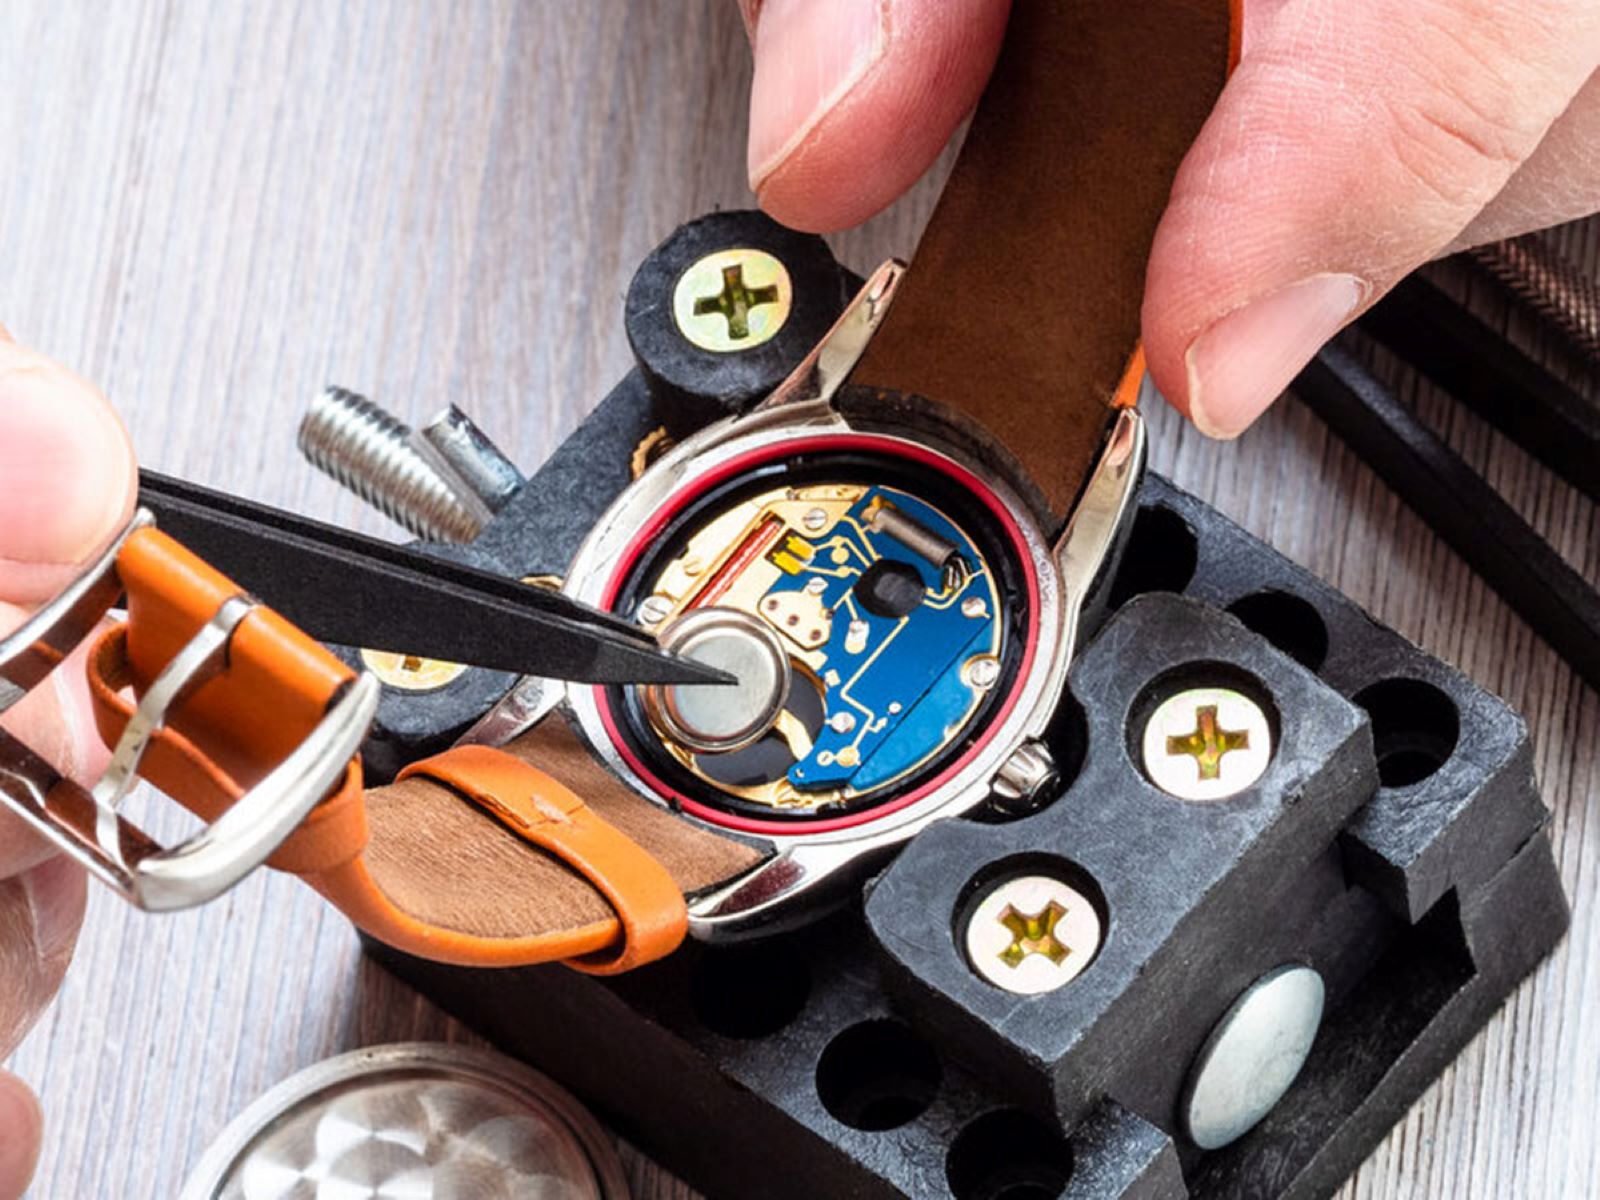 Finding Watch Battery Replacement Services